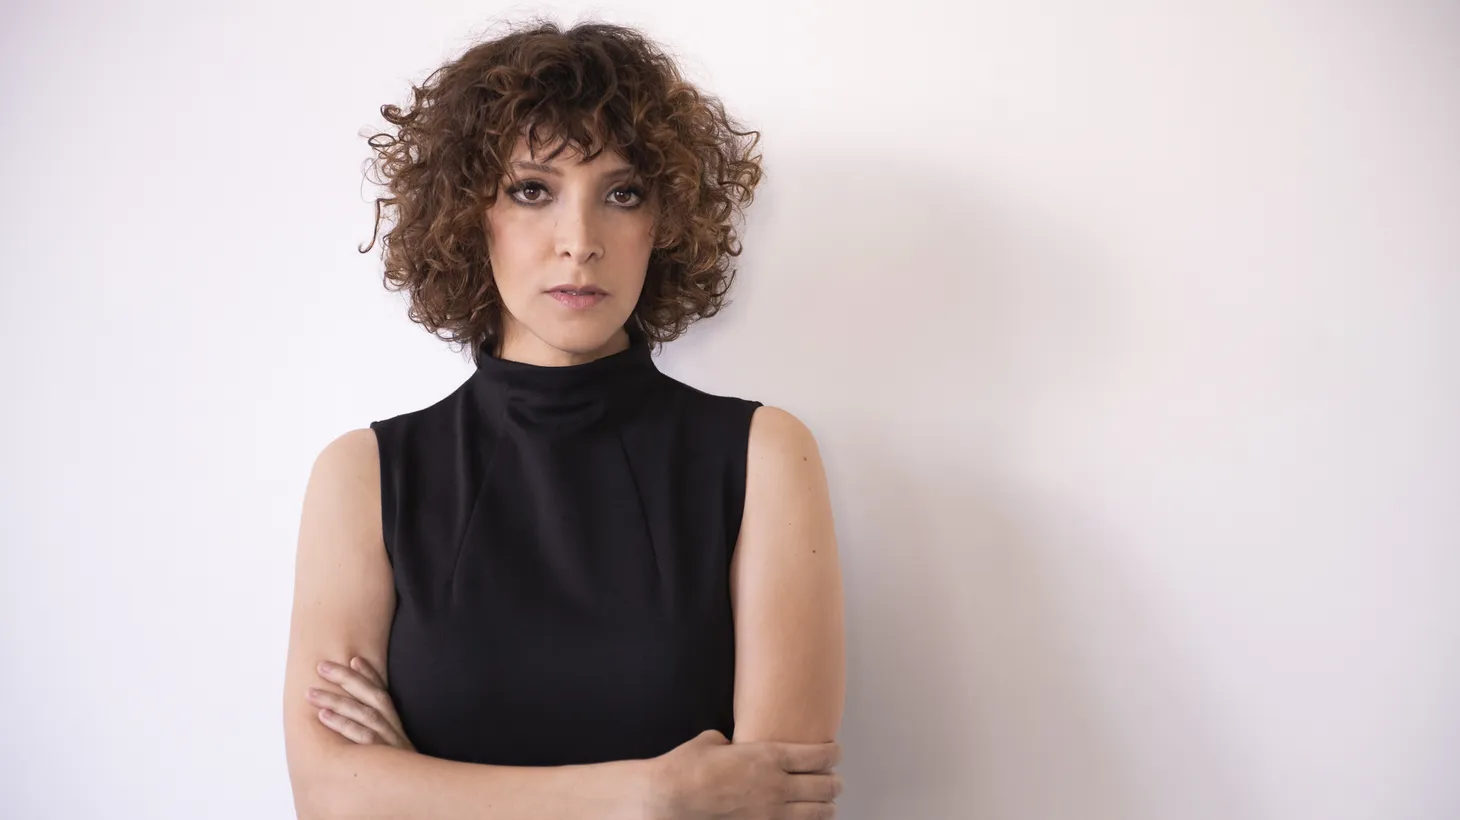 Each song on Gaby Moreno’s new album “Alegoría” displays a different mood and sets a different tone expanding her sonic expression.